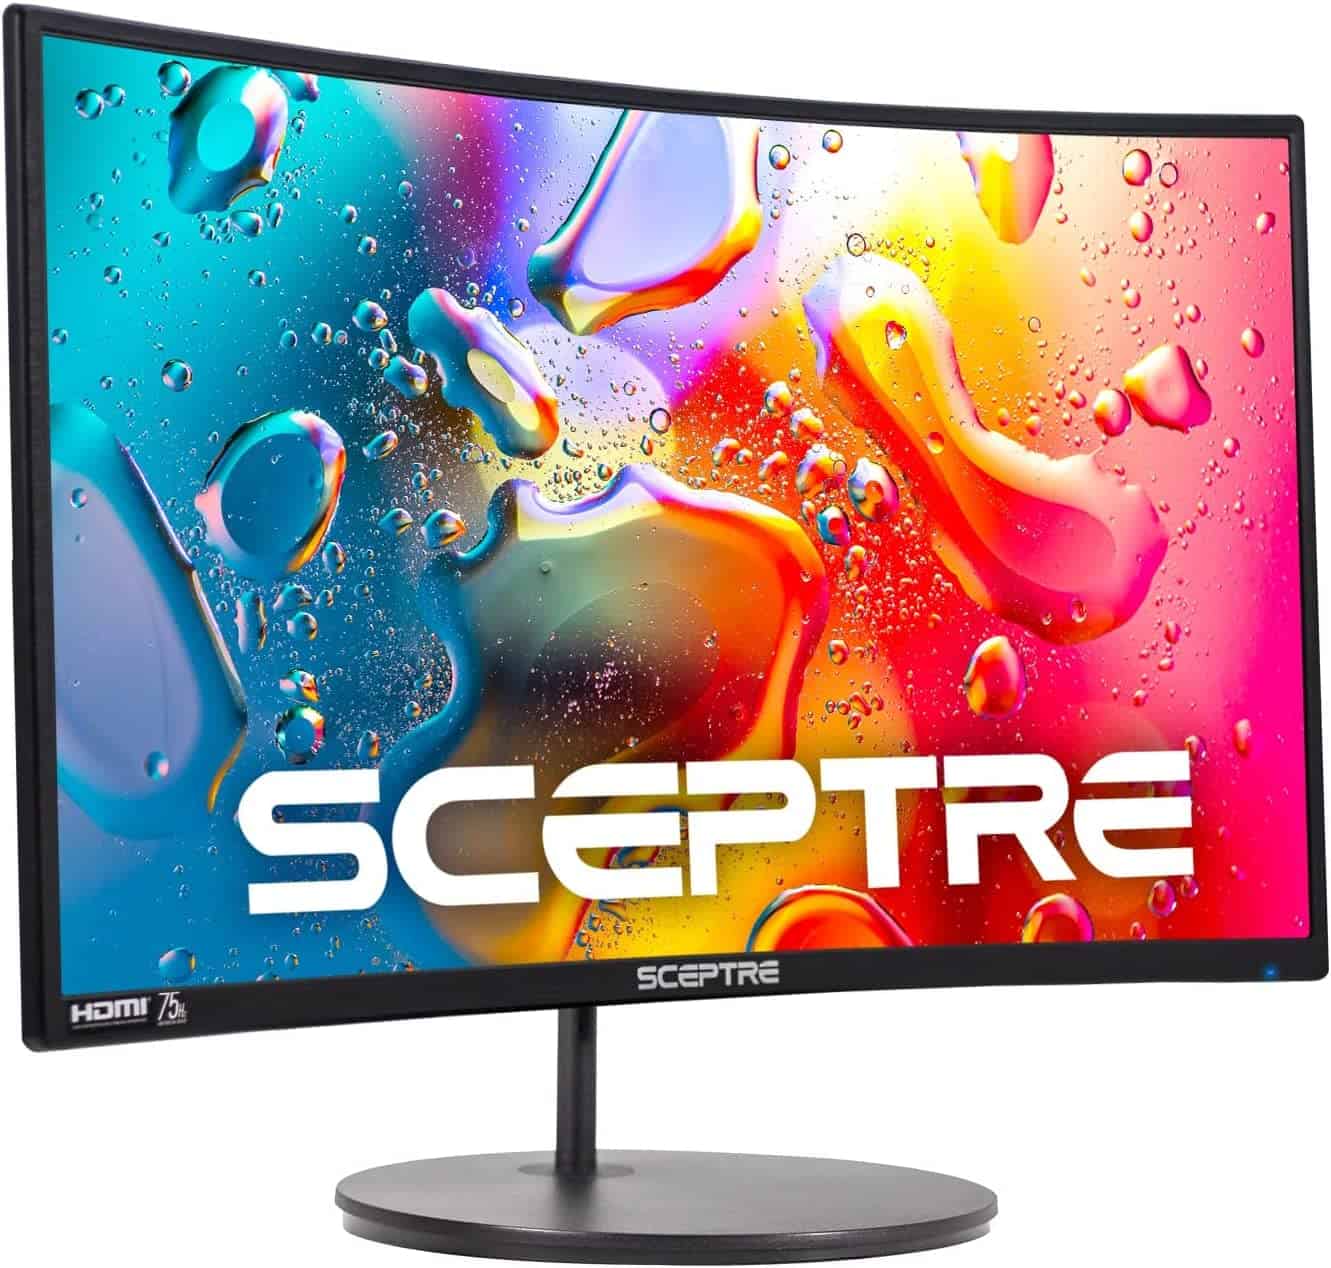 Sceptre Curved 24 inch Gaming Monitor